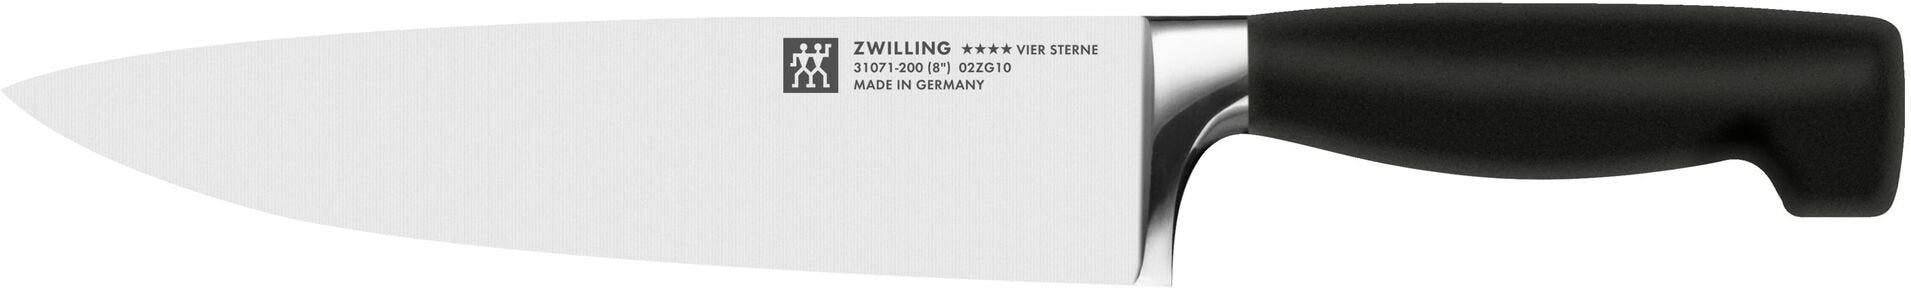 Zwilling - Four Star 8" Chef Knife - 31071-201